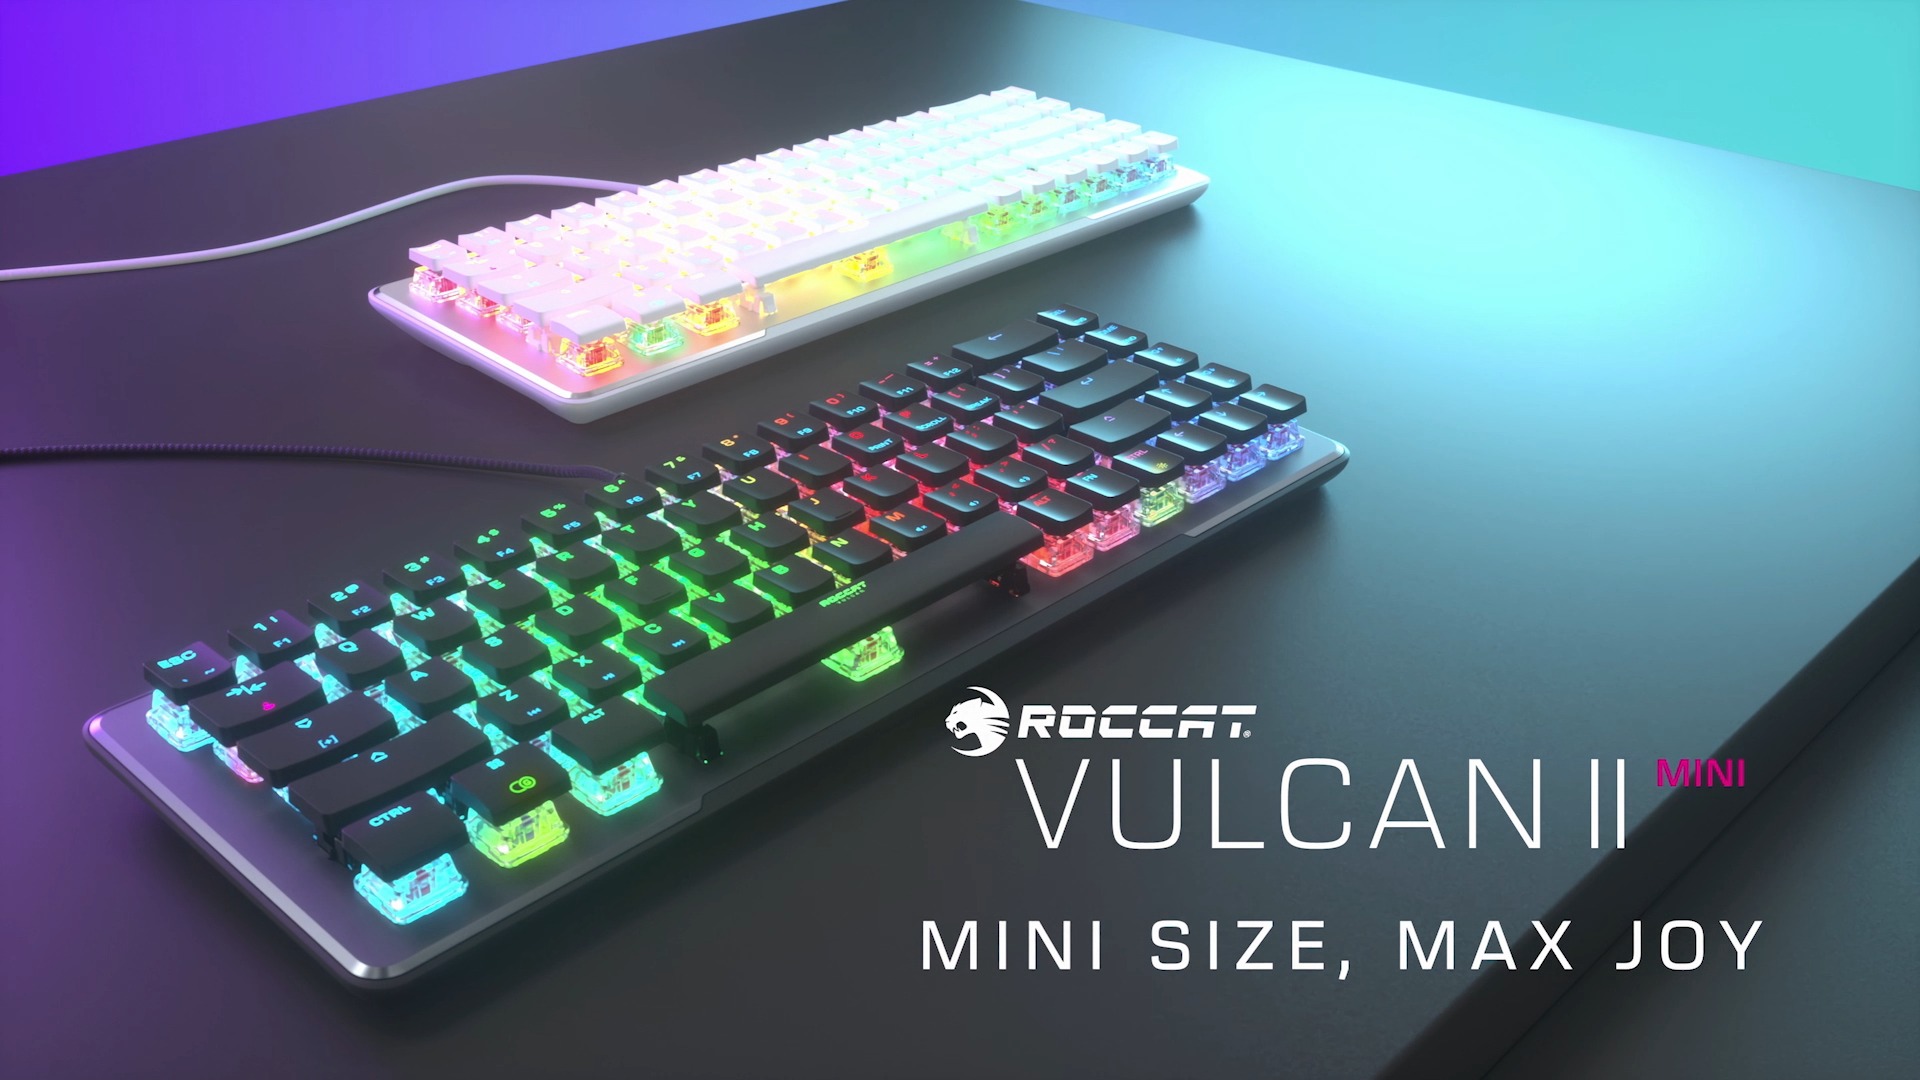 ROCCAT on Twitter: "Mini size, max joy ???? Introducing our first keyboard in  the Vulcan II lineup, the Vulcan II Mini! ???? 65% size of standard keyboards  ???? Smart Keys amp; Easy-Shift[+]